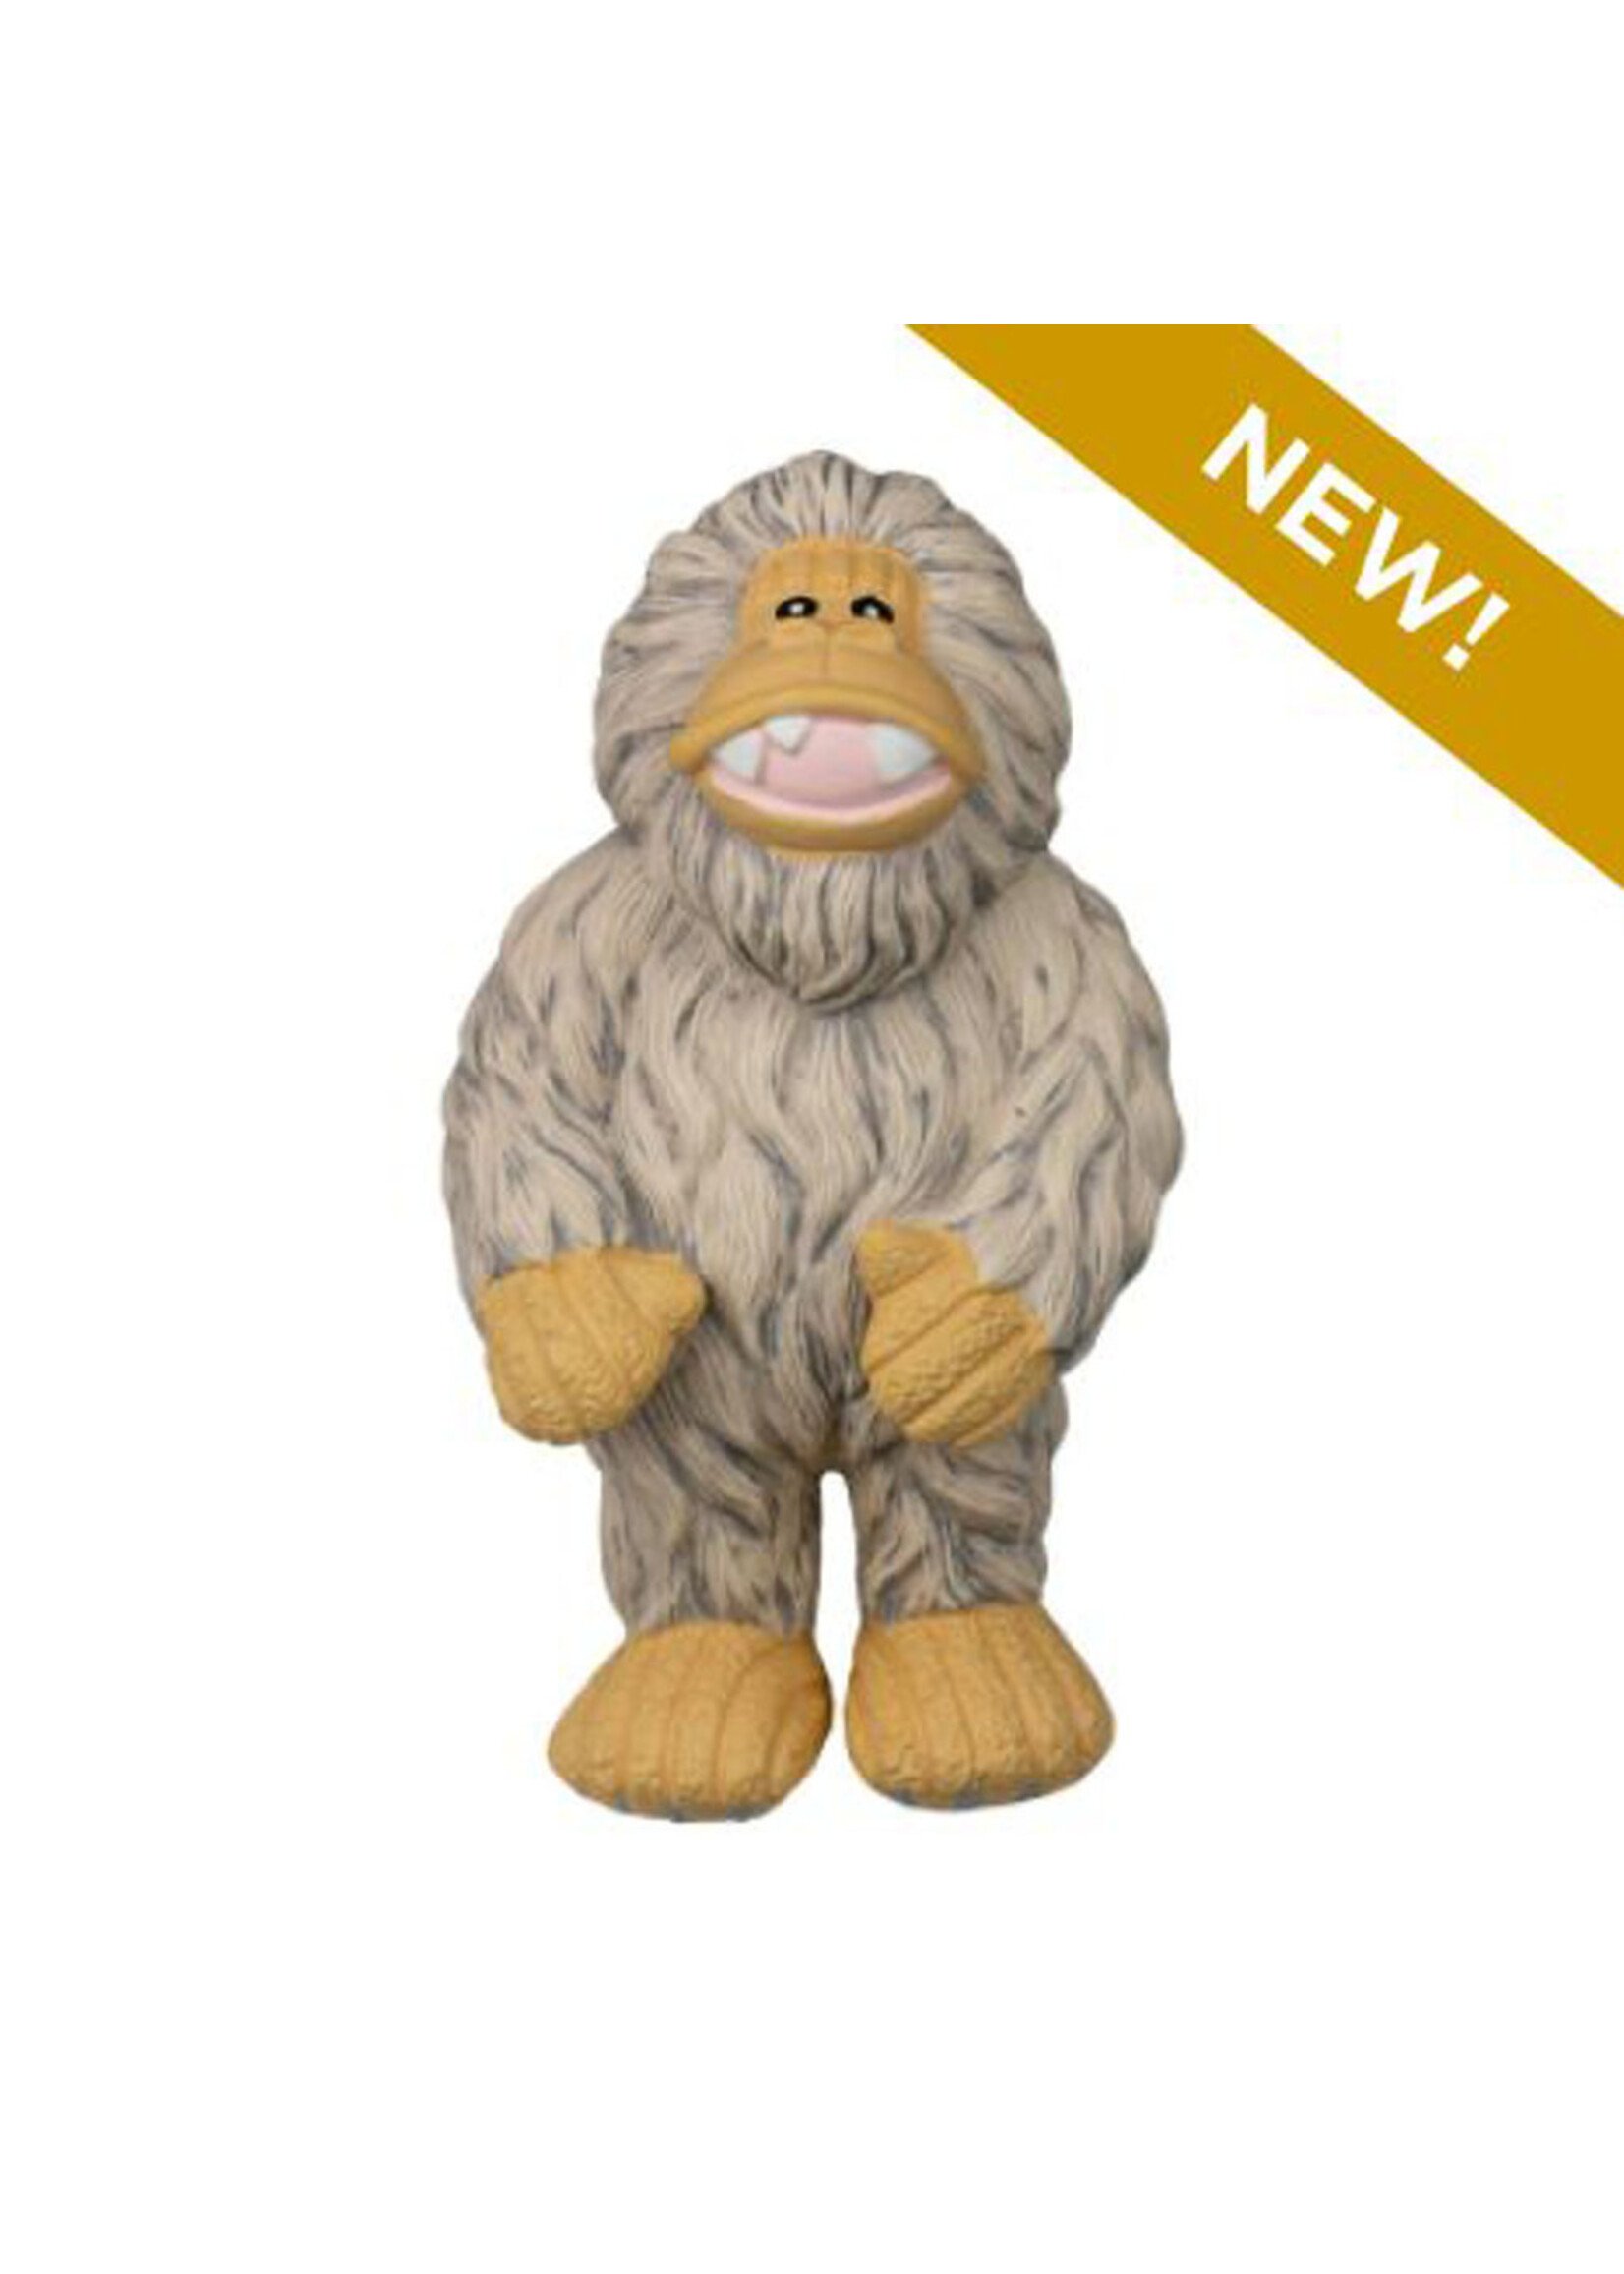 Tall Tails Tall Tails - Latex Yeti Squeaker Toy